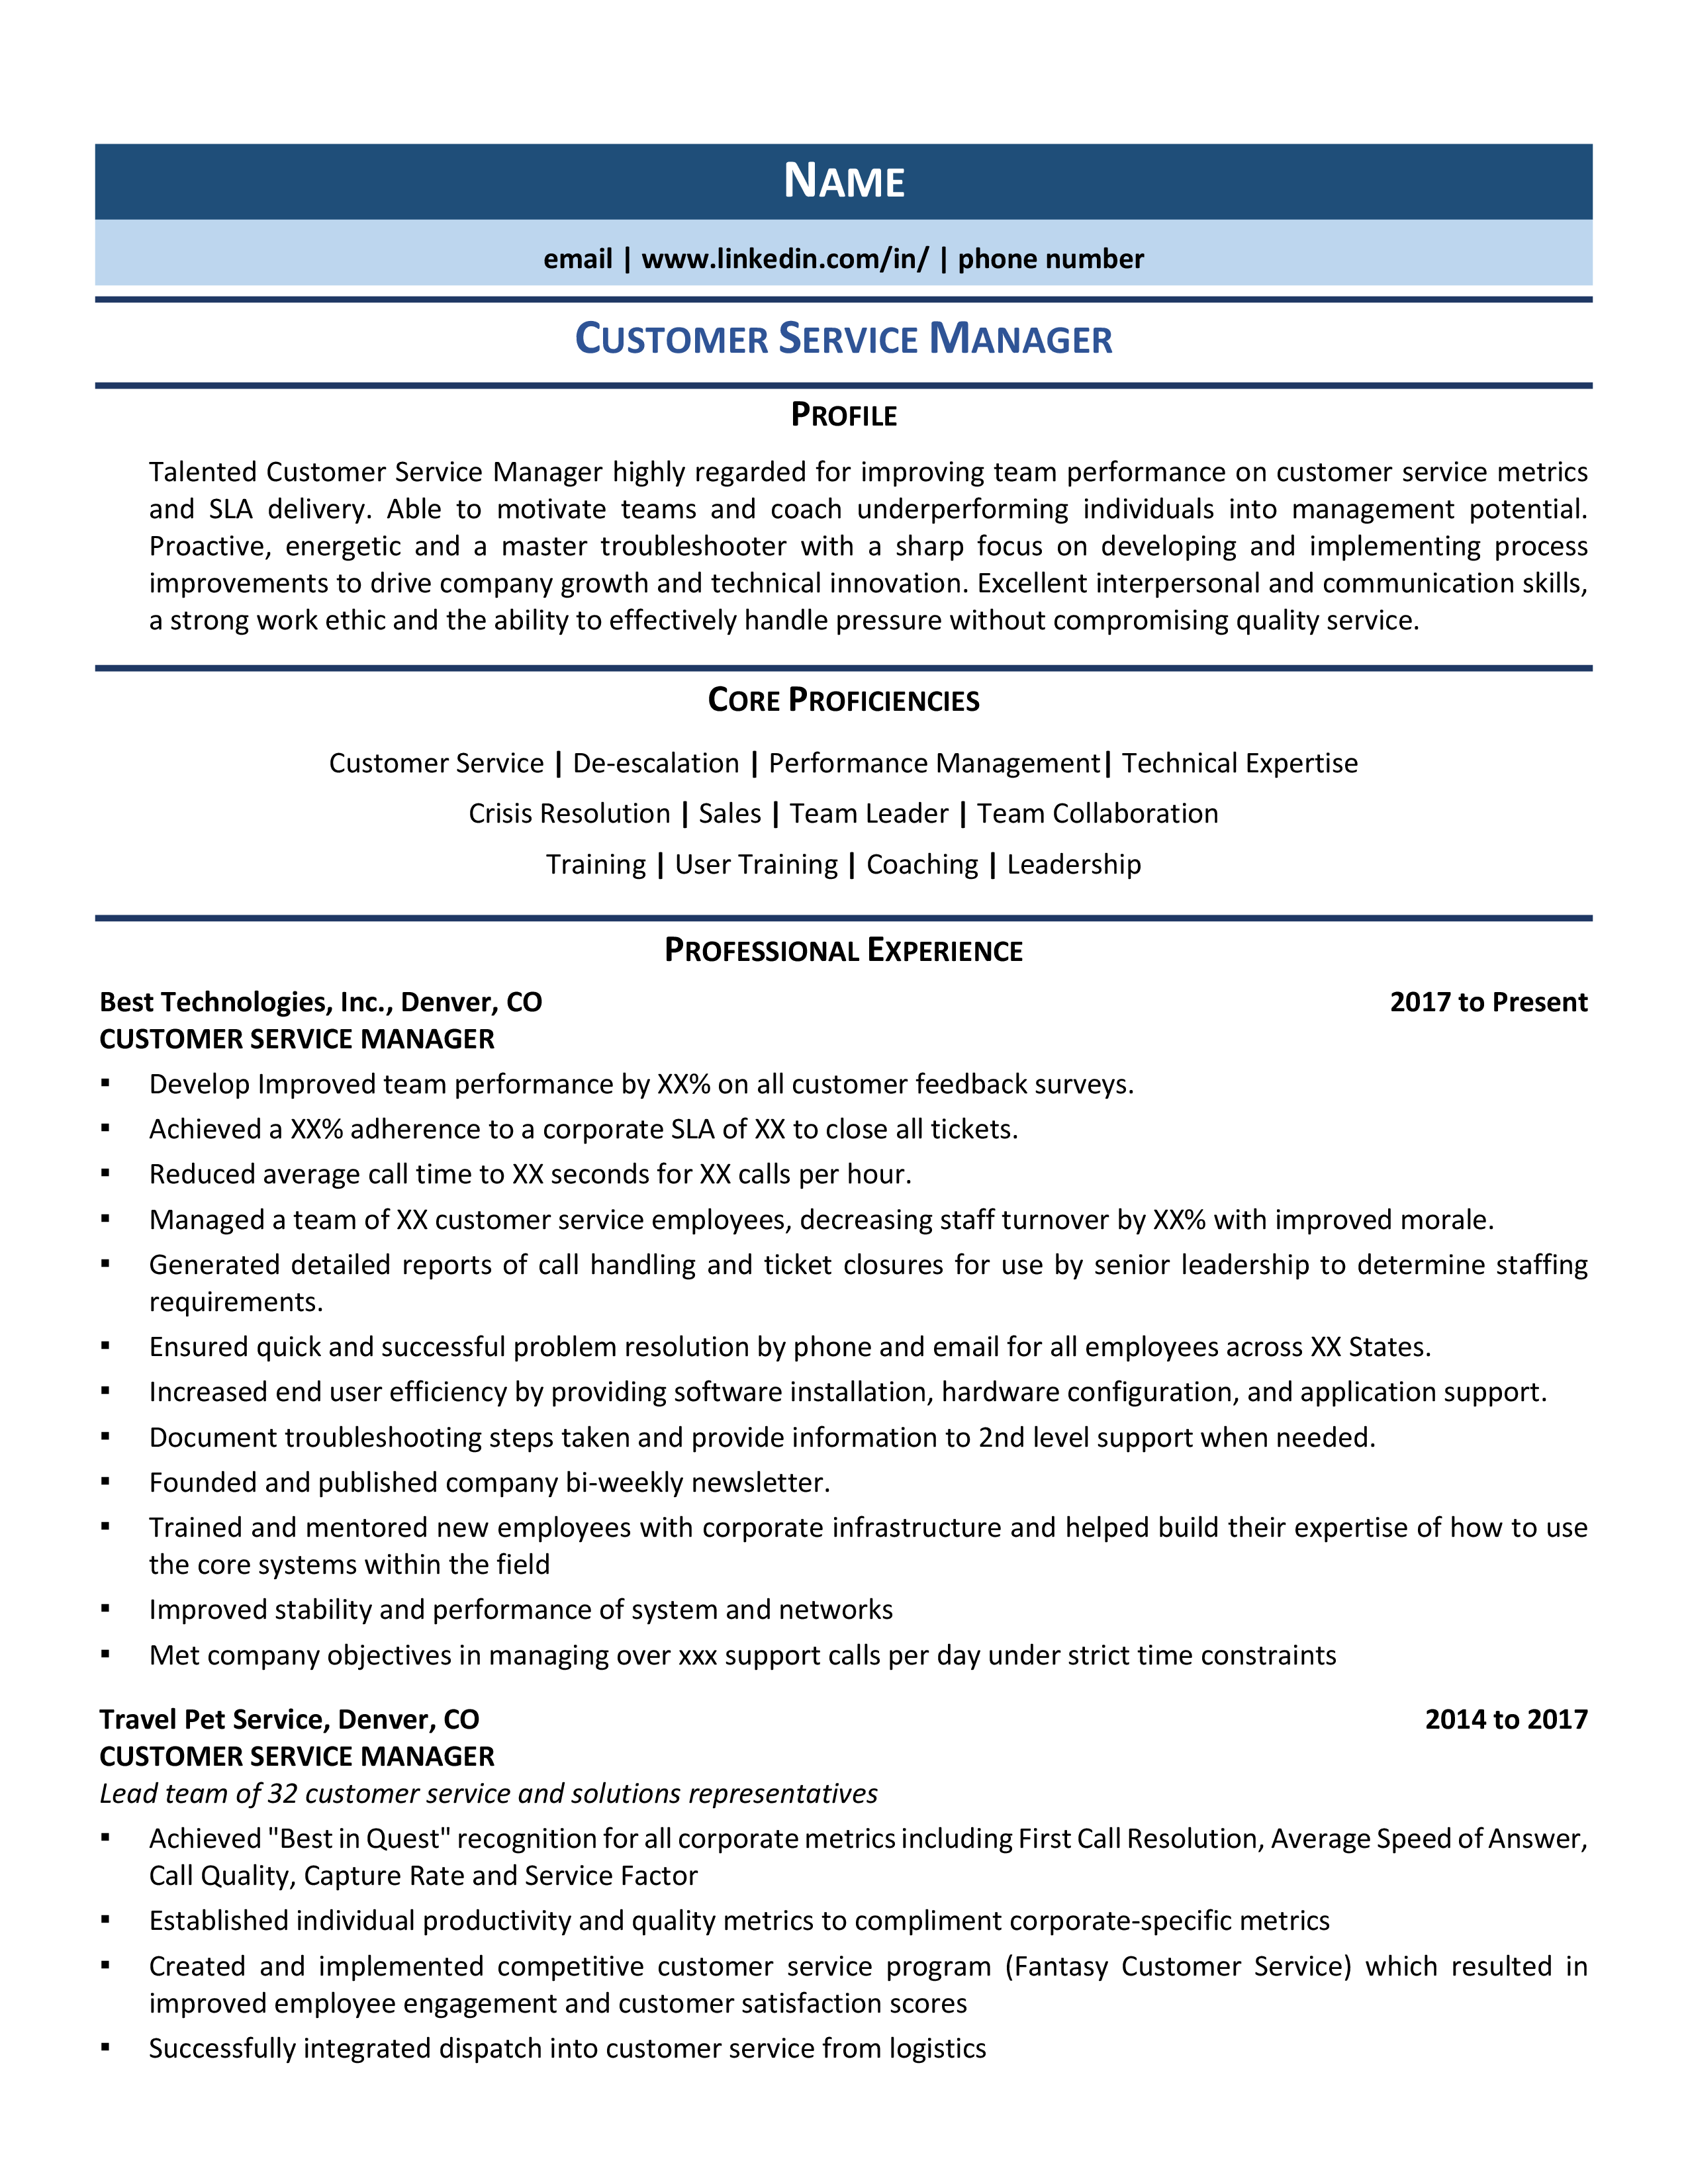 example of resume summary for customer service